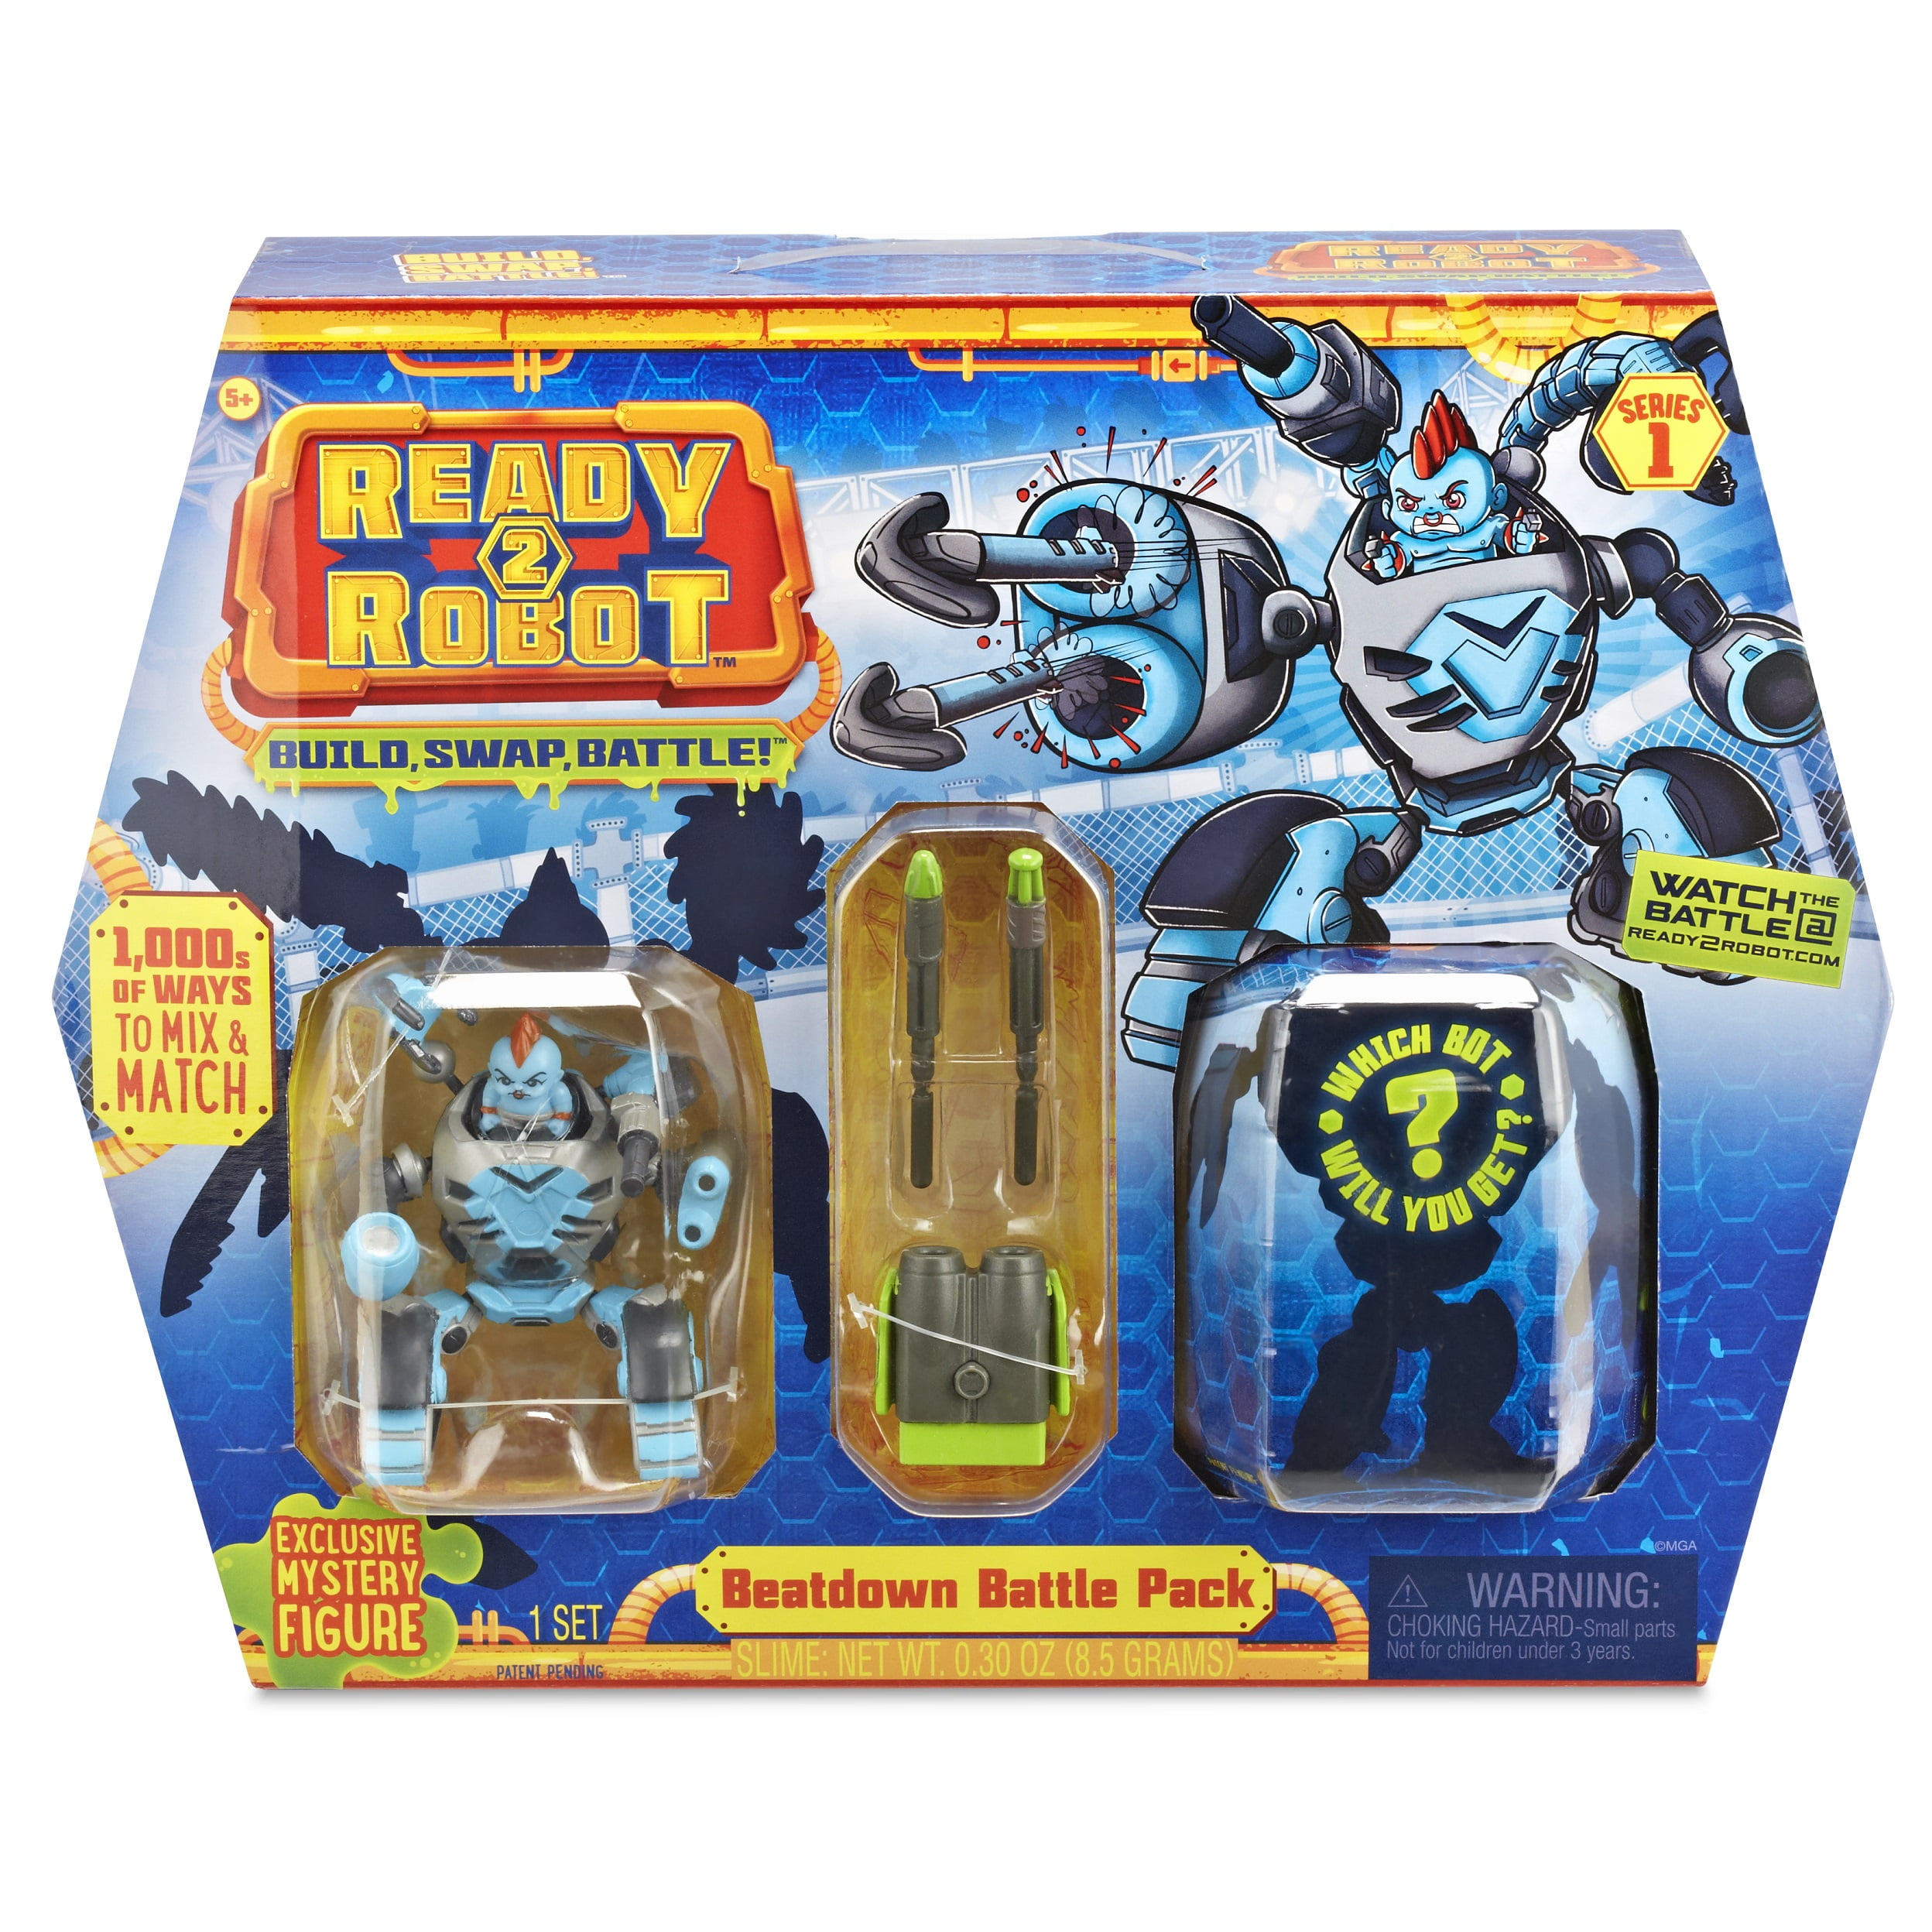 Authentic MGA Ready 2 Robot Beatdown Battle Pack Thermo SERIES 1 Slime 2018 NEW! 